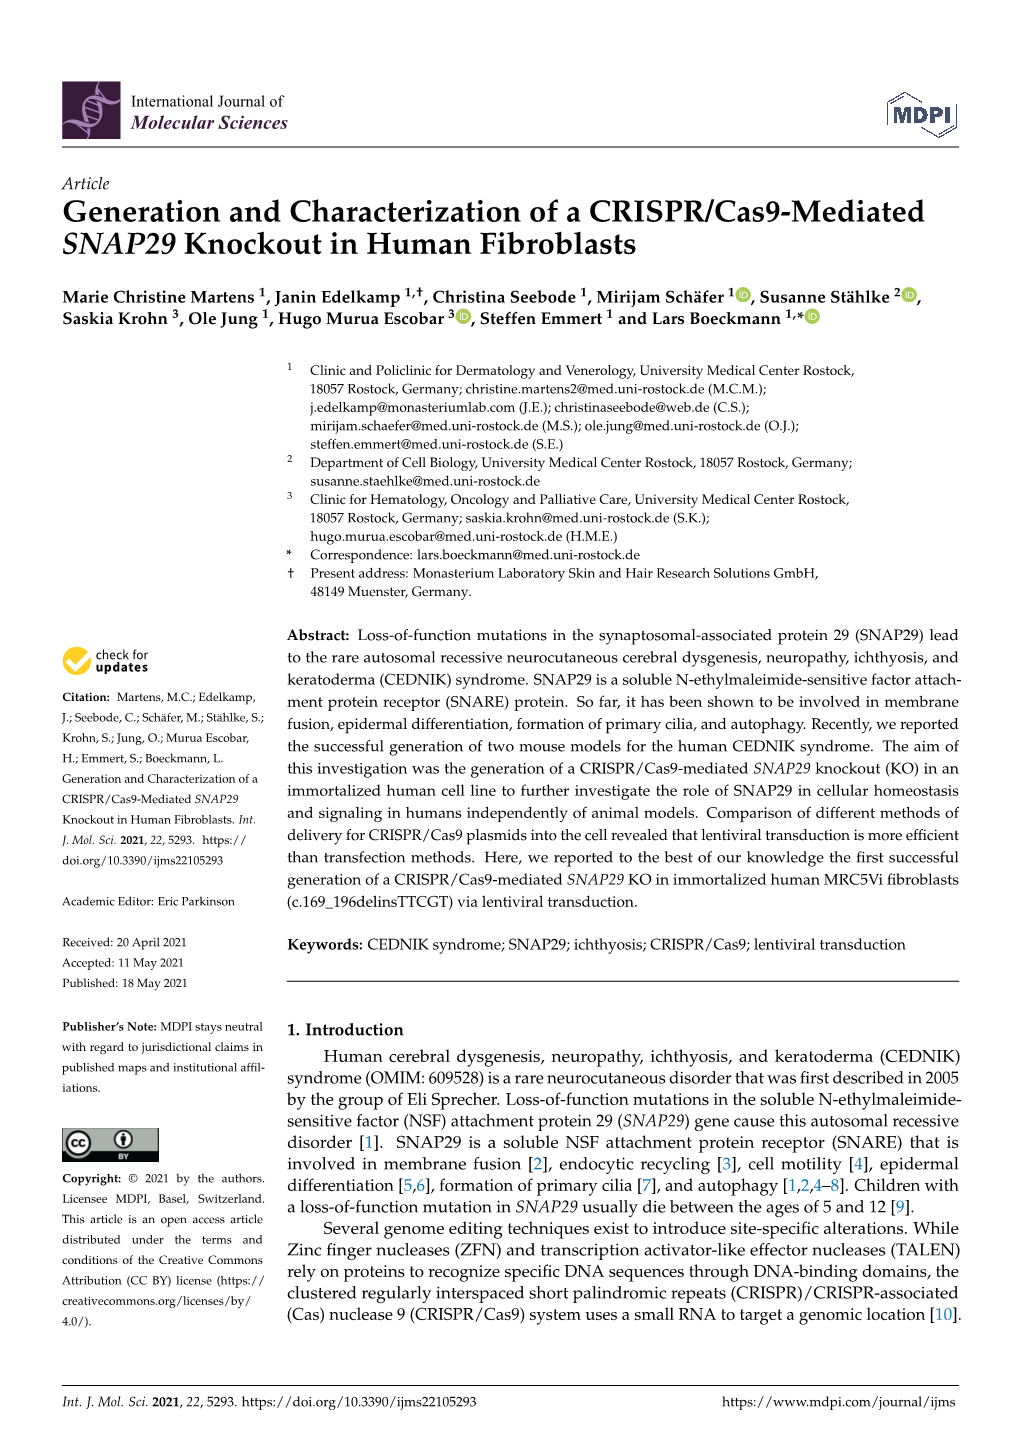 Generation and Characterization of a CRISPR/Cas9-Mediated SNAP29 Knockout in Human Fibroblasts